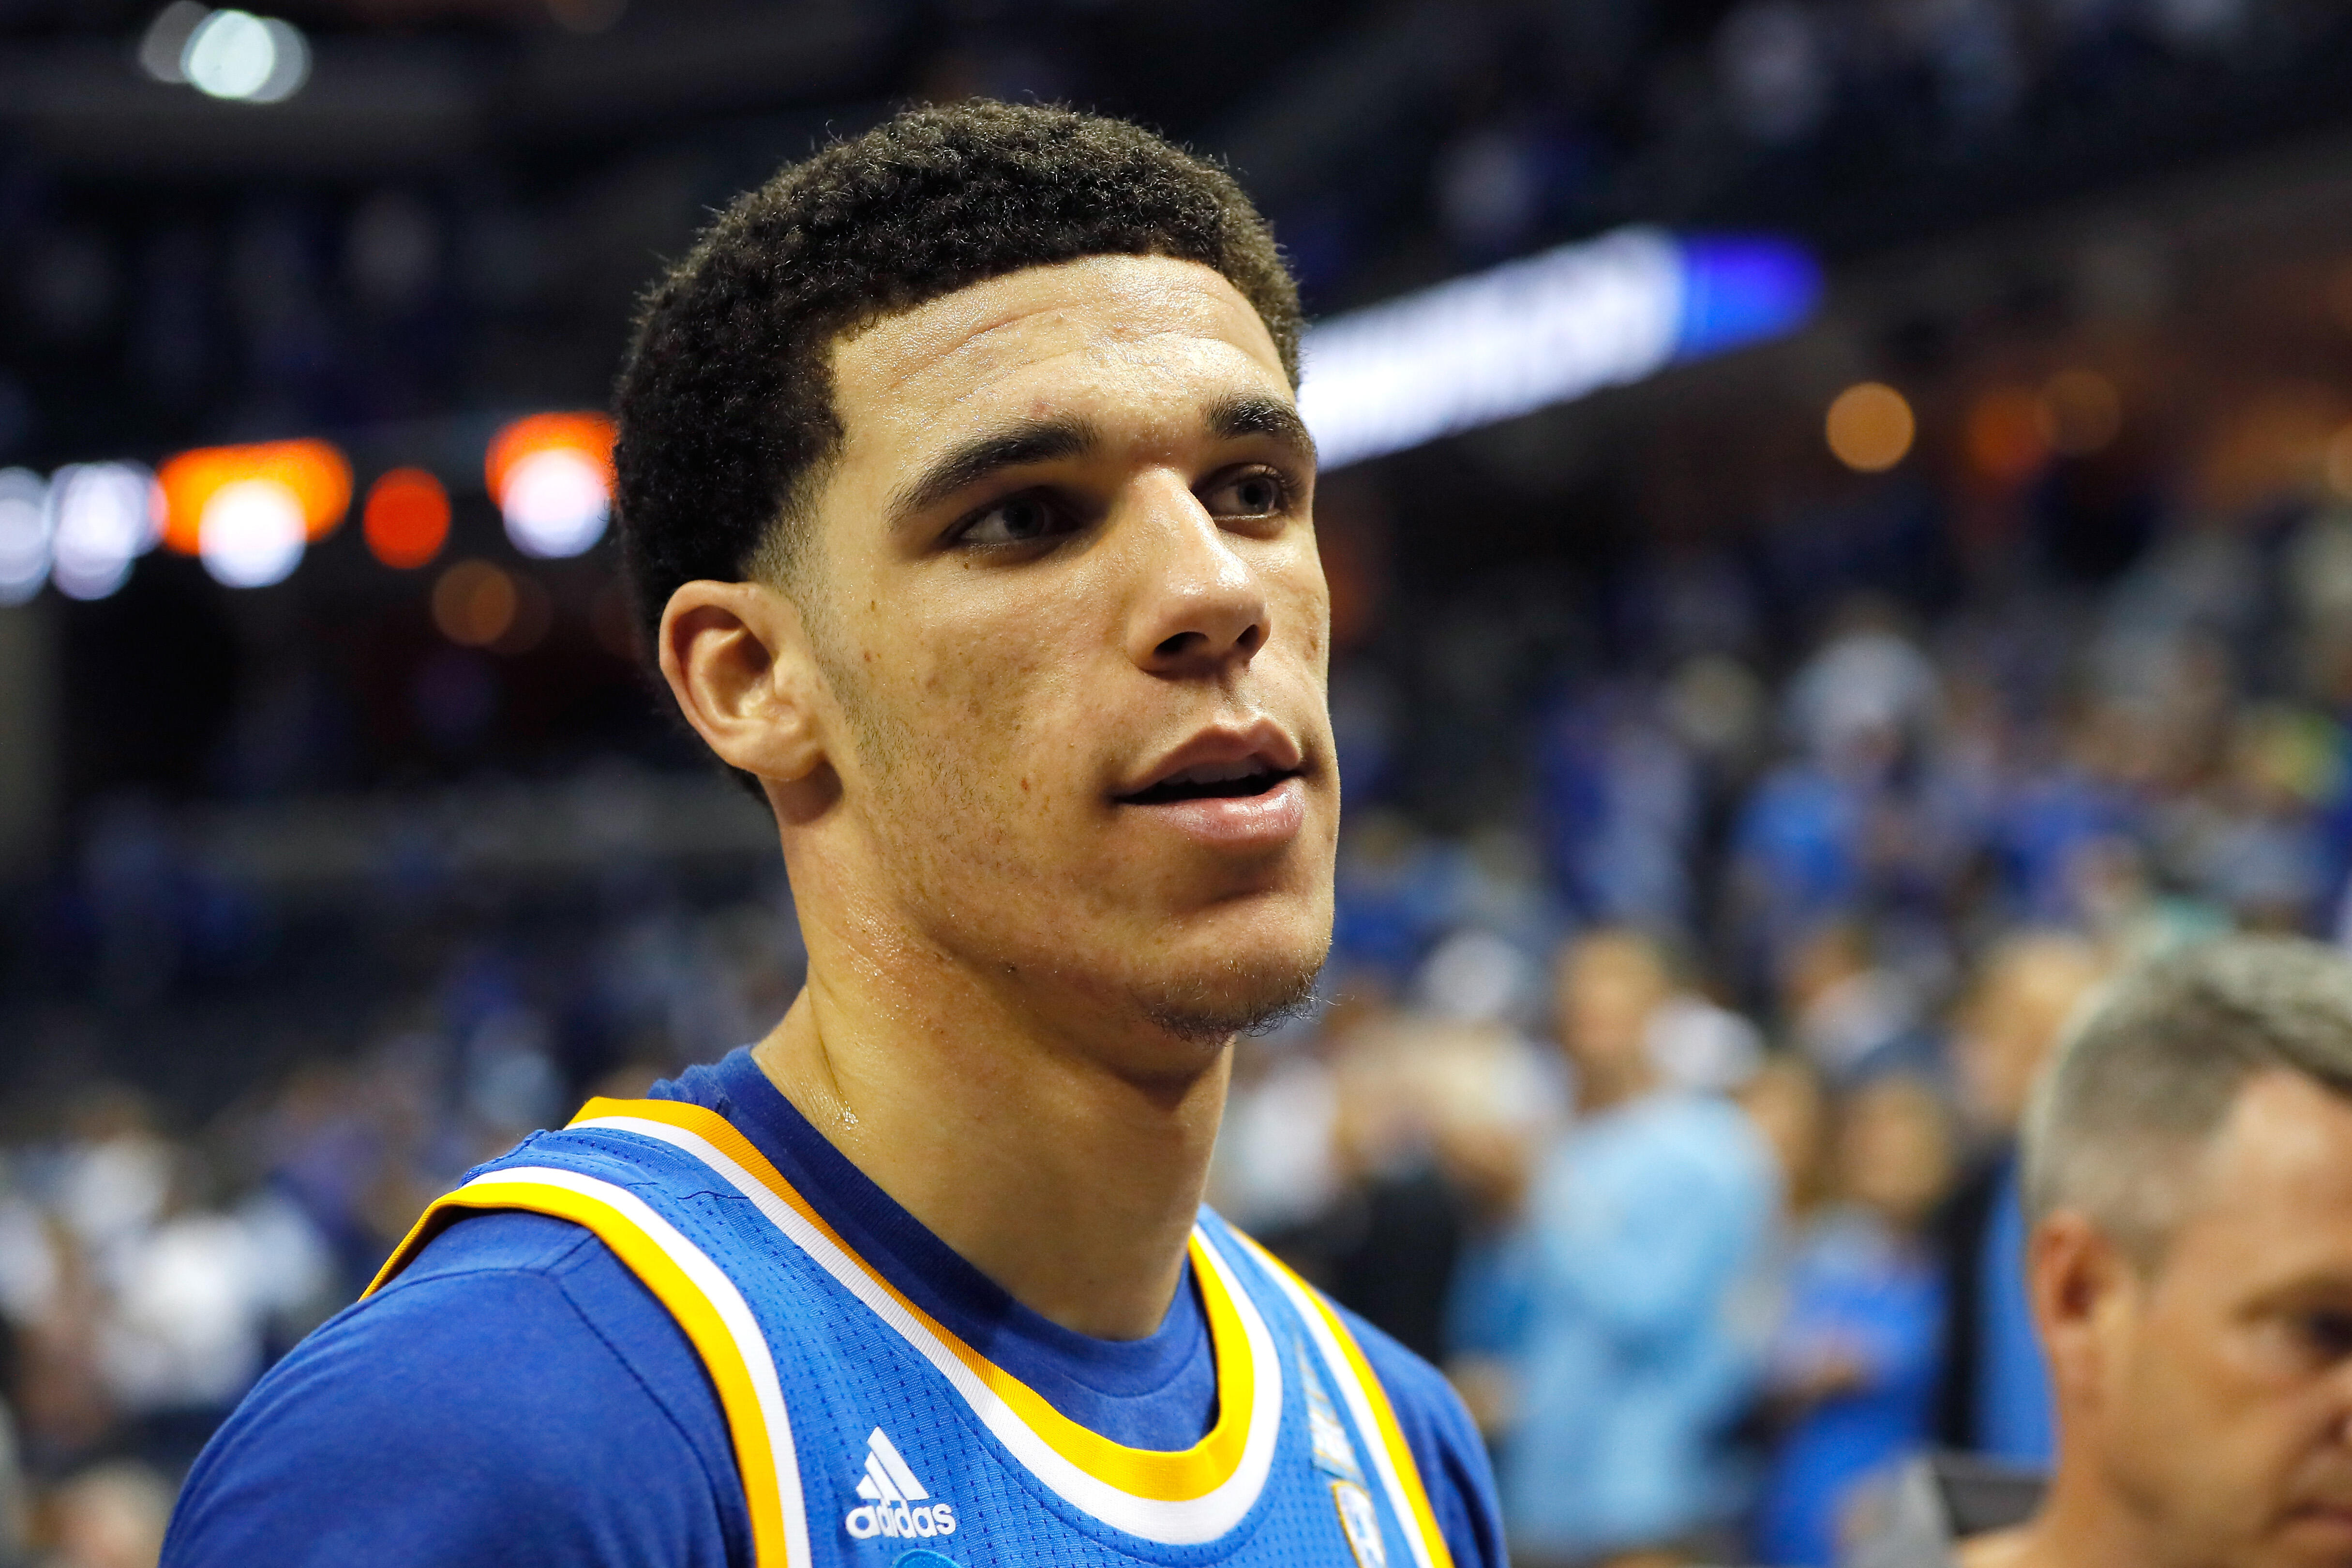 MEMPHIS, TN - MARCH 24:  Lonzo Ball #2 of the UCLA Bruins walks off the court after being defeated by the Kentucky Wildcats during the 2017 NCAA Men's Basketball Tournament South Regional at FedExForum on March 24, 2017 in Memphis, Tennessee.  (Photo by K